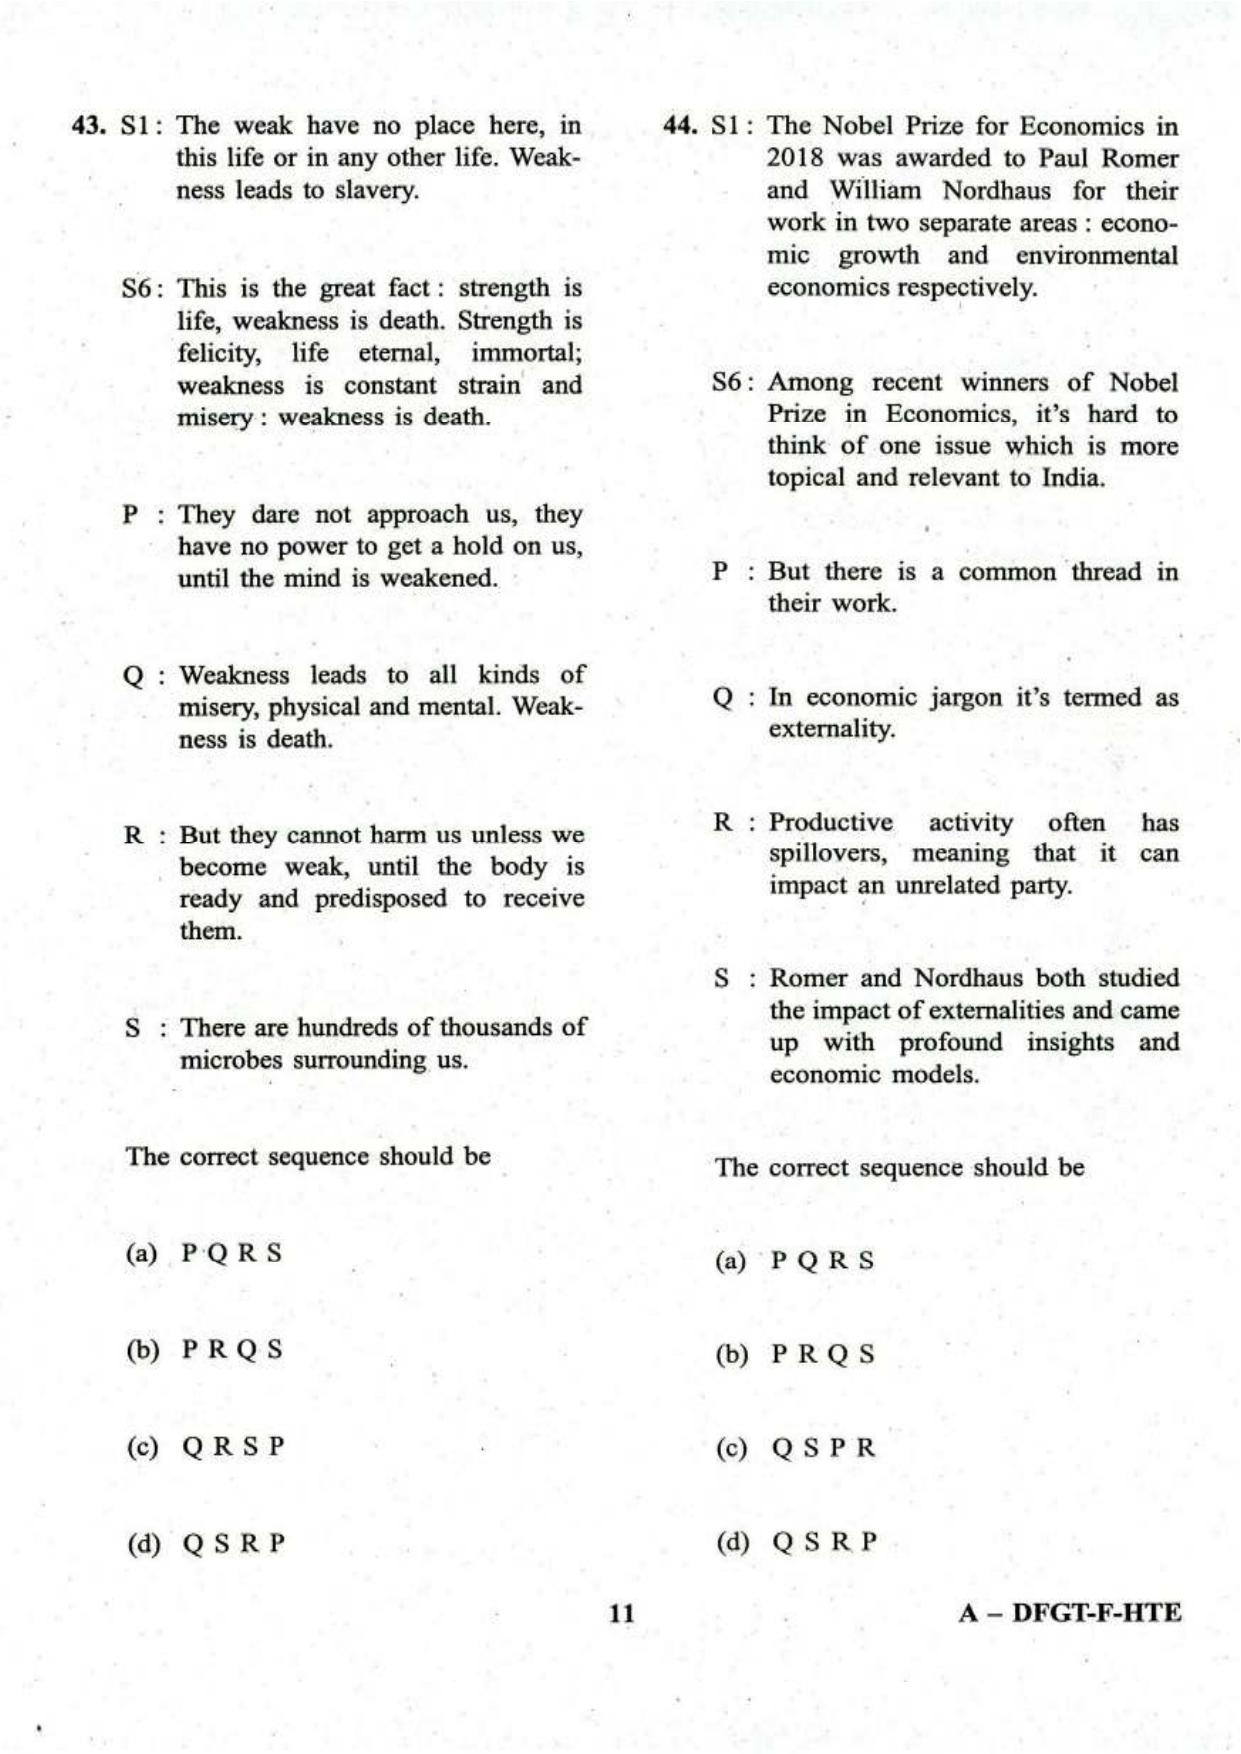 PBSSD General English Old Papers For BLS, PADEO, SPDM, and DPM - Page 11